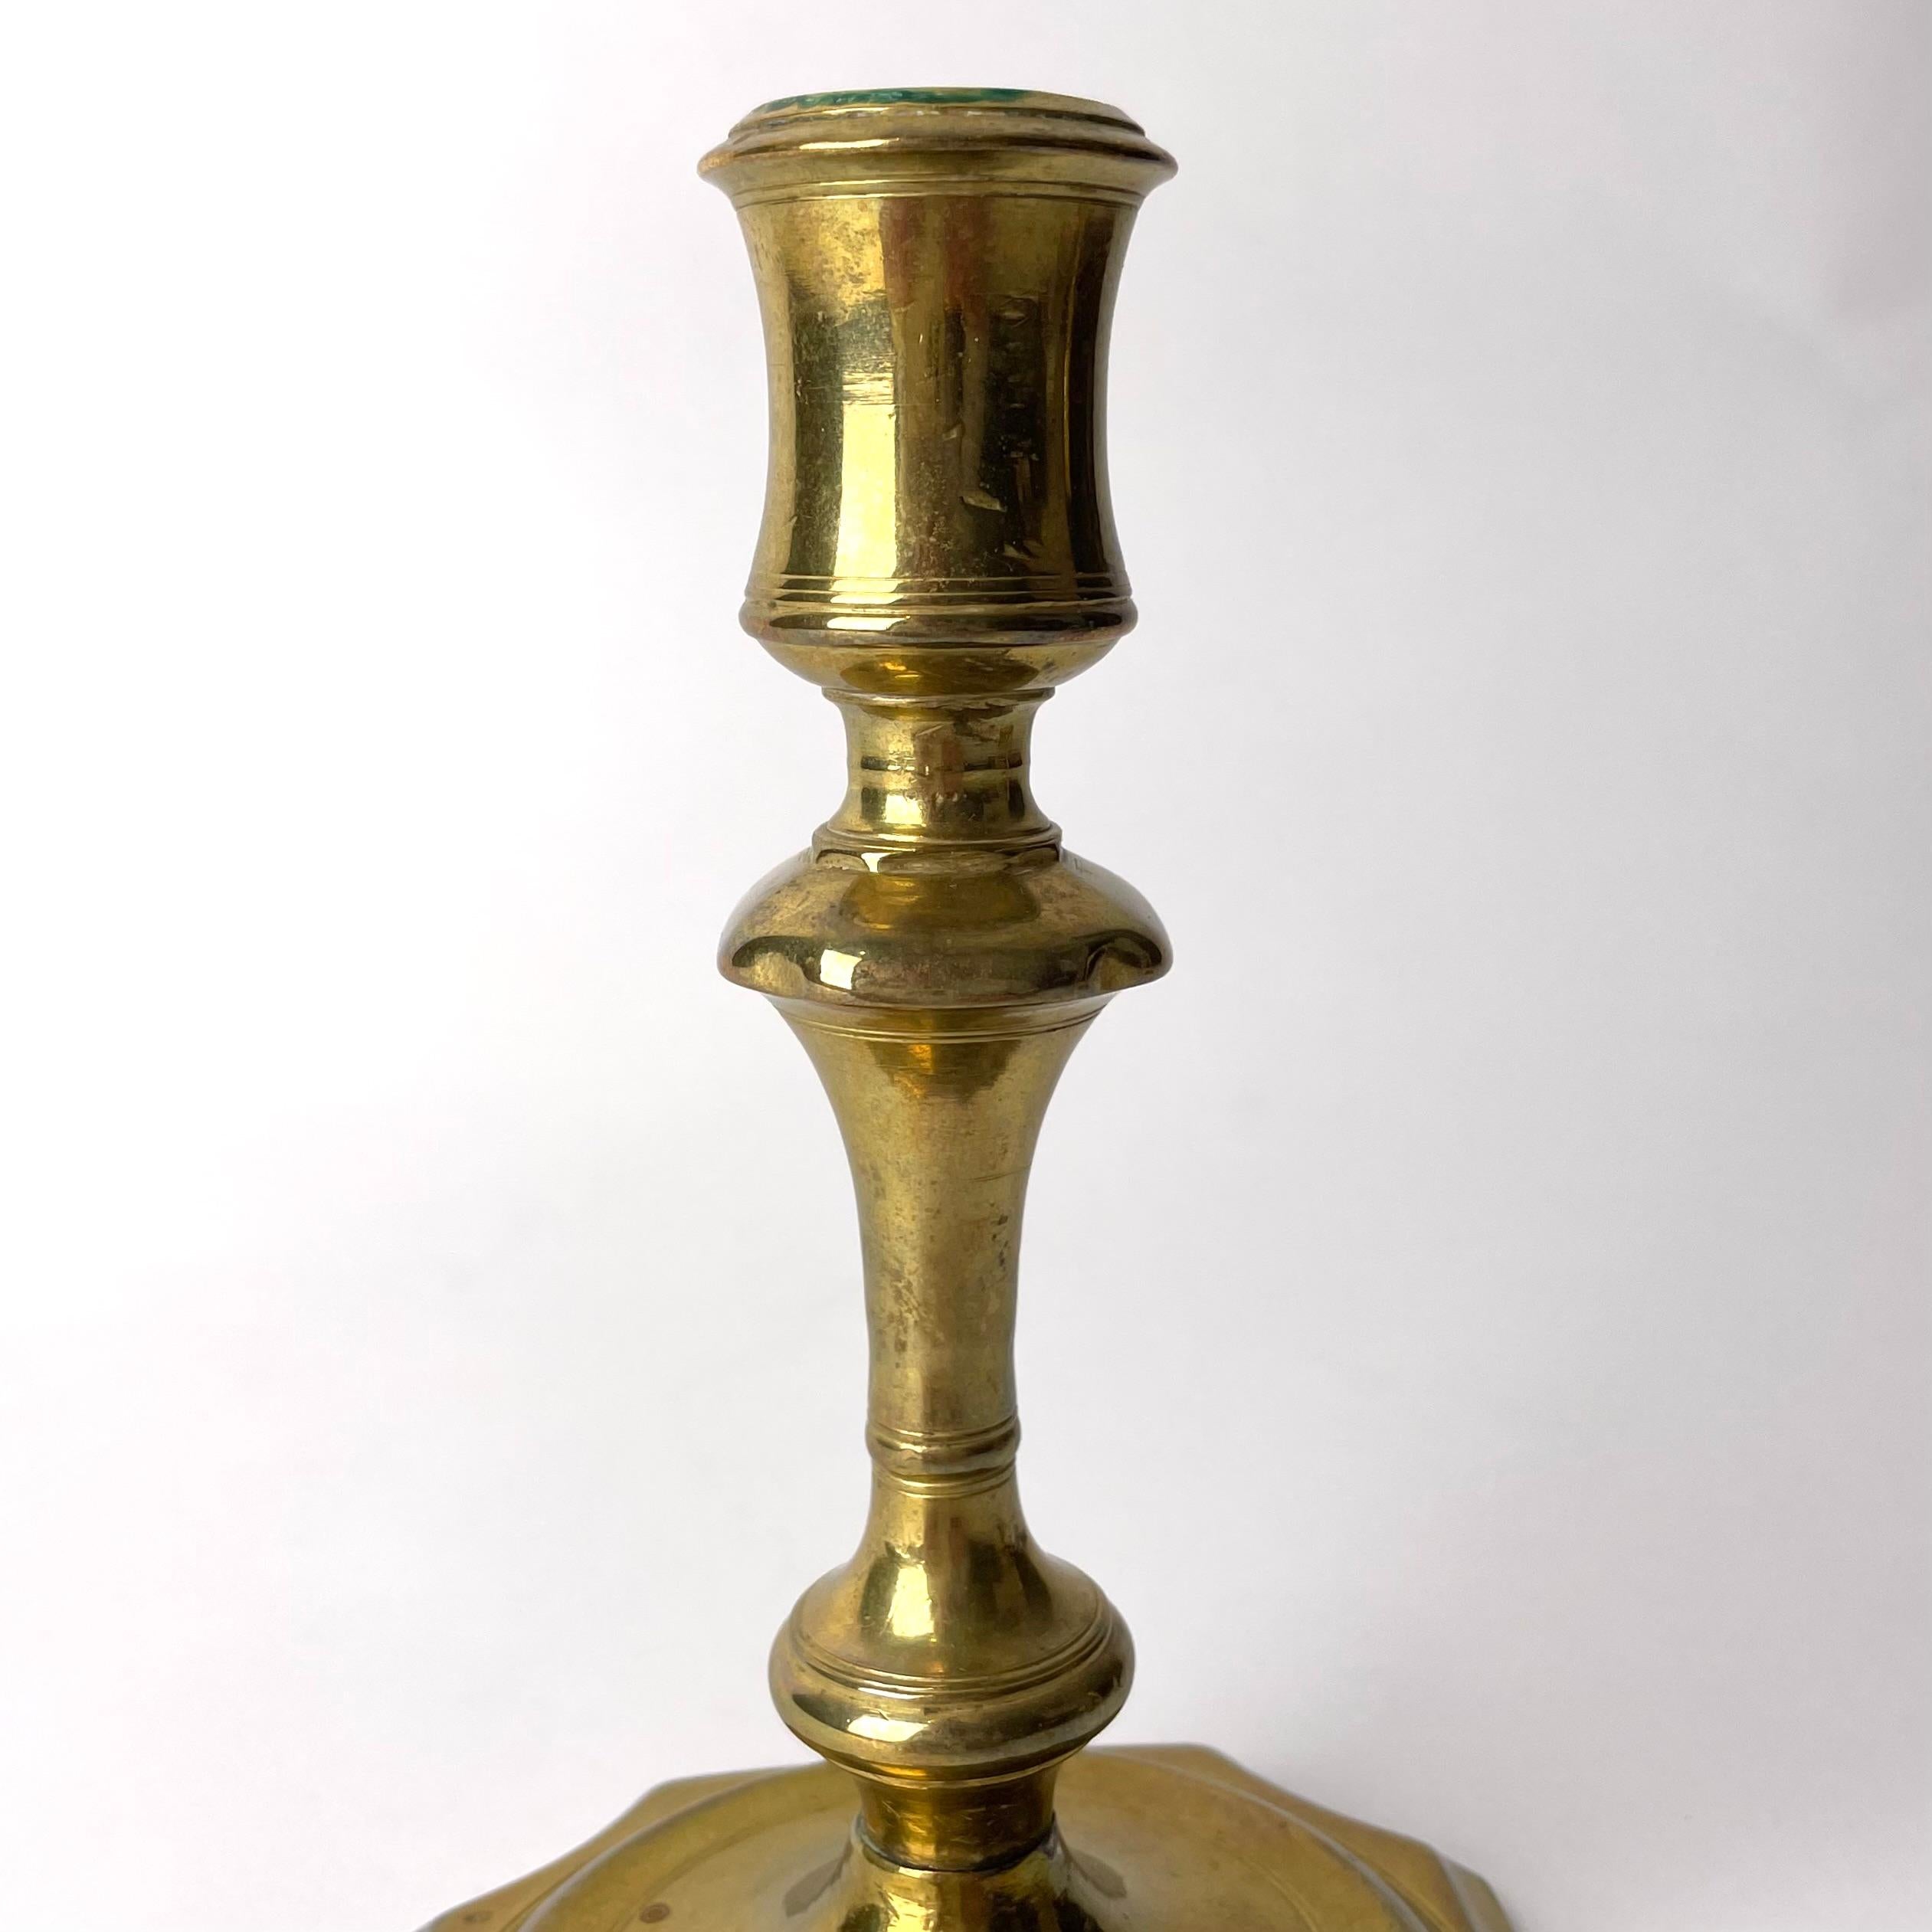 A Pair of 2 Lovely Brass Candlesticks, Late Baroque, Early 18th Century For Sale 2